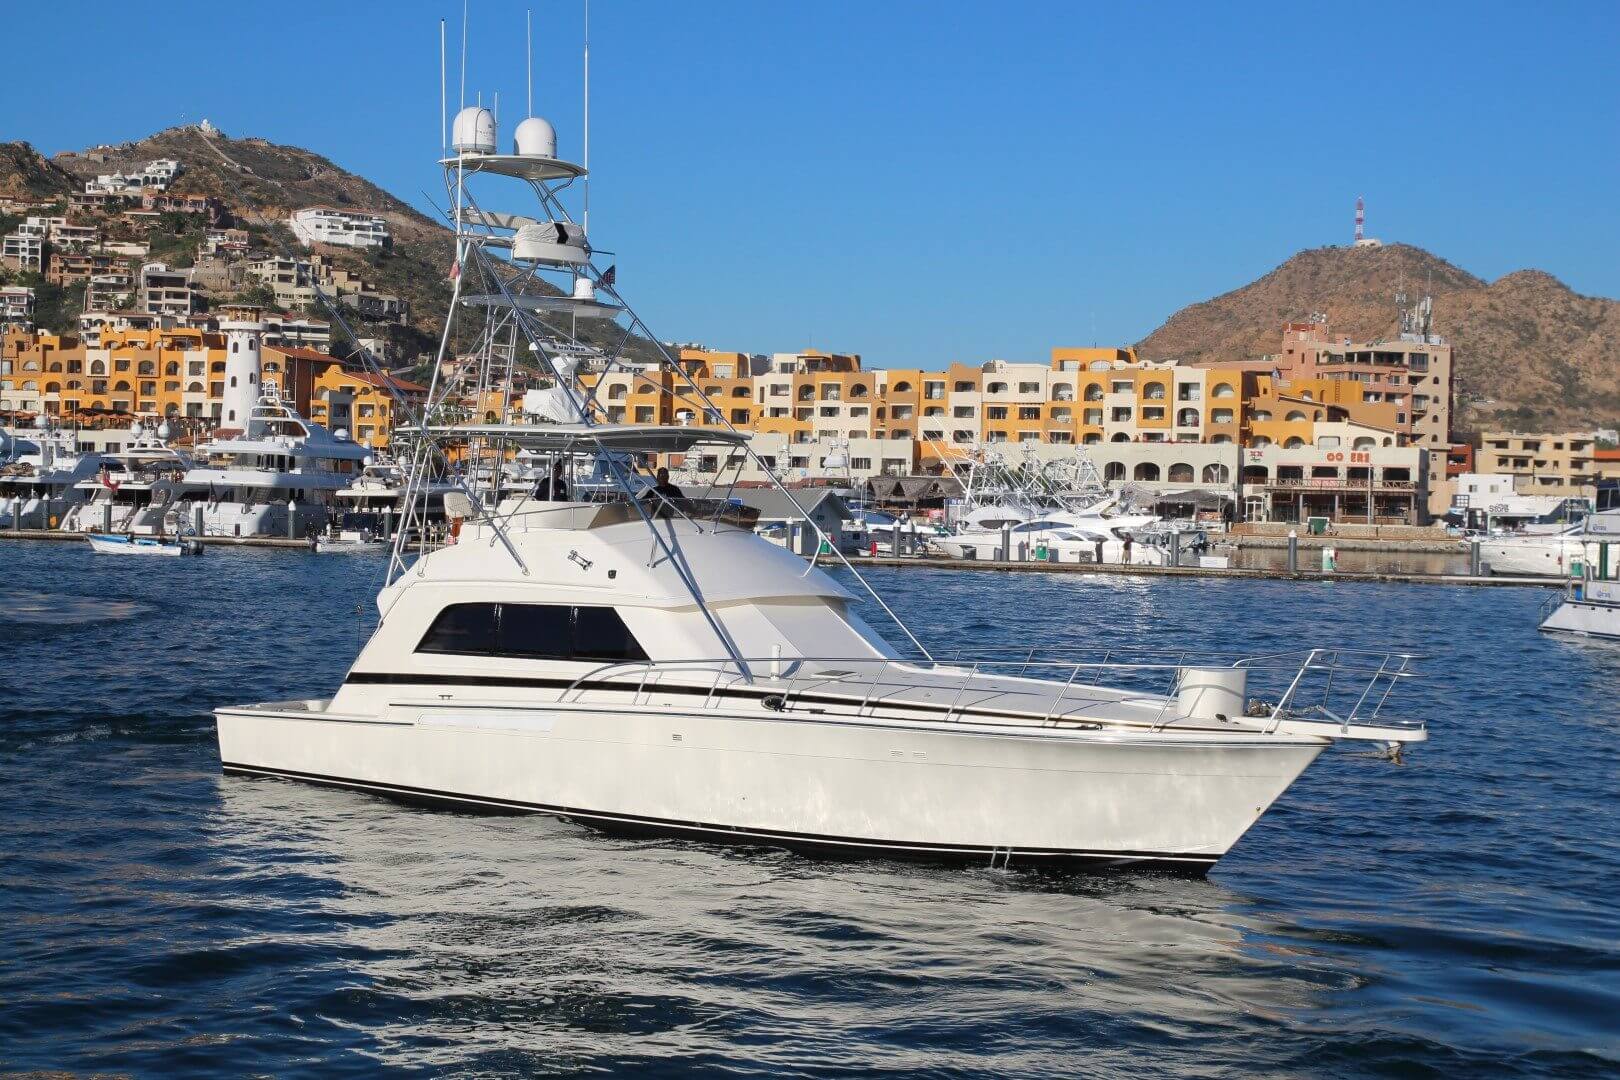 yacht charters cabo san lucas, cabo san lucas charter boats, luxury yacht charter cabo san lucas, cabo yacht rentals, cabo sportfishing, luxury charter yacht cabo san lucas, yacht charters cabo san lucas boat charters, boat charters cabo san lucas, yacht rentals cabo, yacht in cabo san lucas, yachts cabo san lucas, los cabos yacht charter, san jose del cabo yacht charters, cabo charter yacht, cabo san lucas yacht charter, yacht charters cabo cabo, yacht charters, yachts in cabo san lucas, charter boats in cabo san lucas, cabo yacht charter, boat charter cabo san lucas, yacht charters in cabo, yachts in cabo cabo san lucas yachts, luxury yacht rental in cabo san lucas, private yacht rental cabo san lucas, los cabos yacht, cabo san lucas yacht rentals, yacht rentals cabo san lucas, cabo san lucas yacht, private yacht charter cabo san lucas, private yacht charters to cabo, day yacht charters cabo san lucas, luxury yachts cabo yacht cabo san lucas, cabo yachts for charter, yacht in cabo yacht cabo, private yacht cabo san lucas, yacht los cabos, boat charter cabo san lucas mexico, yacht charter los cabos, yachts cabo cabo, charter boats cabo boat charters, day yacht charters cabo, cabo luxury yacht charter, cabo yacht, cabo private yacht charter, yacht charter cabo, yacht party rental, yacht party rentals, rent a yacht for a party, how much does it cost to rent a yacht for a party, party yacht rental, boat party rental, yacht party, rent a party yacht, birthday party on a boat, rent yacht for a party, party boat rental, yacht rental, party boat rentals near me, boat rental, boat party rental, luxury yacht, charter boat, rent a boat, rent a party boat, pontoon rentals in san diego, yacht rentals in san diego, rent yacht in san diego, rent boat in san diego harbor, can you rent boats in san diego, which rent boats in san diego, rent boat in san diego, rent a party boat in san diego, boat rental san diego pacific beach, boat rental san diego cheap, boat rental san diego with captain, boat rental san diego county, boat rental san diego with driver, boats in san diego for rent, how much to rent a boat in san diego, rent a small boat in san diego, pacific boat rentals san diego ca, boat rentals overnight, boat rentals at mission bay in san diego, can you rent a boat obernight in san diego, how much does it cost to rent a boat in san diego, how much is it to ret a boat in san diego, rental boats in san diego, where can i rent a boat in san diego, how to rent a yacht in san diego, where to rent boats in san diego, where to rent a boat in san diego, we yacht it party chart, yacht it party yacht rentals, for the perfect yacht charter, boat renting, boat rental san diego, san diego boat rentals, boats for rent san diego, party boat rentals san diego mission bay, boat rentals mission bay, party boat rentals, boat rentals mission bay, boat rentals in san diego ca, mai tai yacht charters san diego, rent a yacht in san diego ca, best yacht rentals in san diego ca, best boat rentals in san diego, cheap boat rentals in san diego, boat rentals in san diego california, boat rentals san diego mission bay, yacht rental san diego prices, cheap yacht rental san diego, yacht rental san diego cost, party boat rental san diego mission bay, san diego yacht, yacht vacation rentals san diego, boat rental- san diego group on, how to rent a boat in san diego, how to rent a boat for party in san diego, how to rent a boat in mission bay snan diego, how much does it cost to rent a yacht in San Diego, How much is it to rent a yacht for a night in San Diego, How much does it cost to rent a private yacht for a day, How much does it cost to rent a small yacht